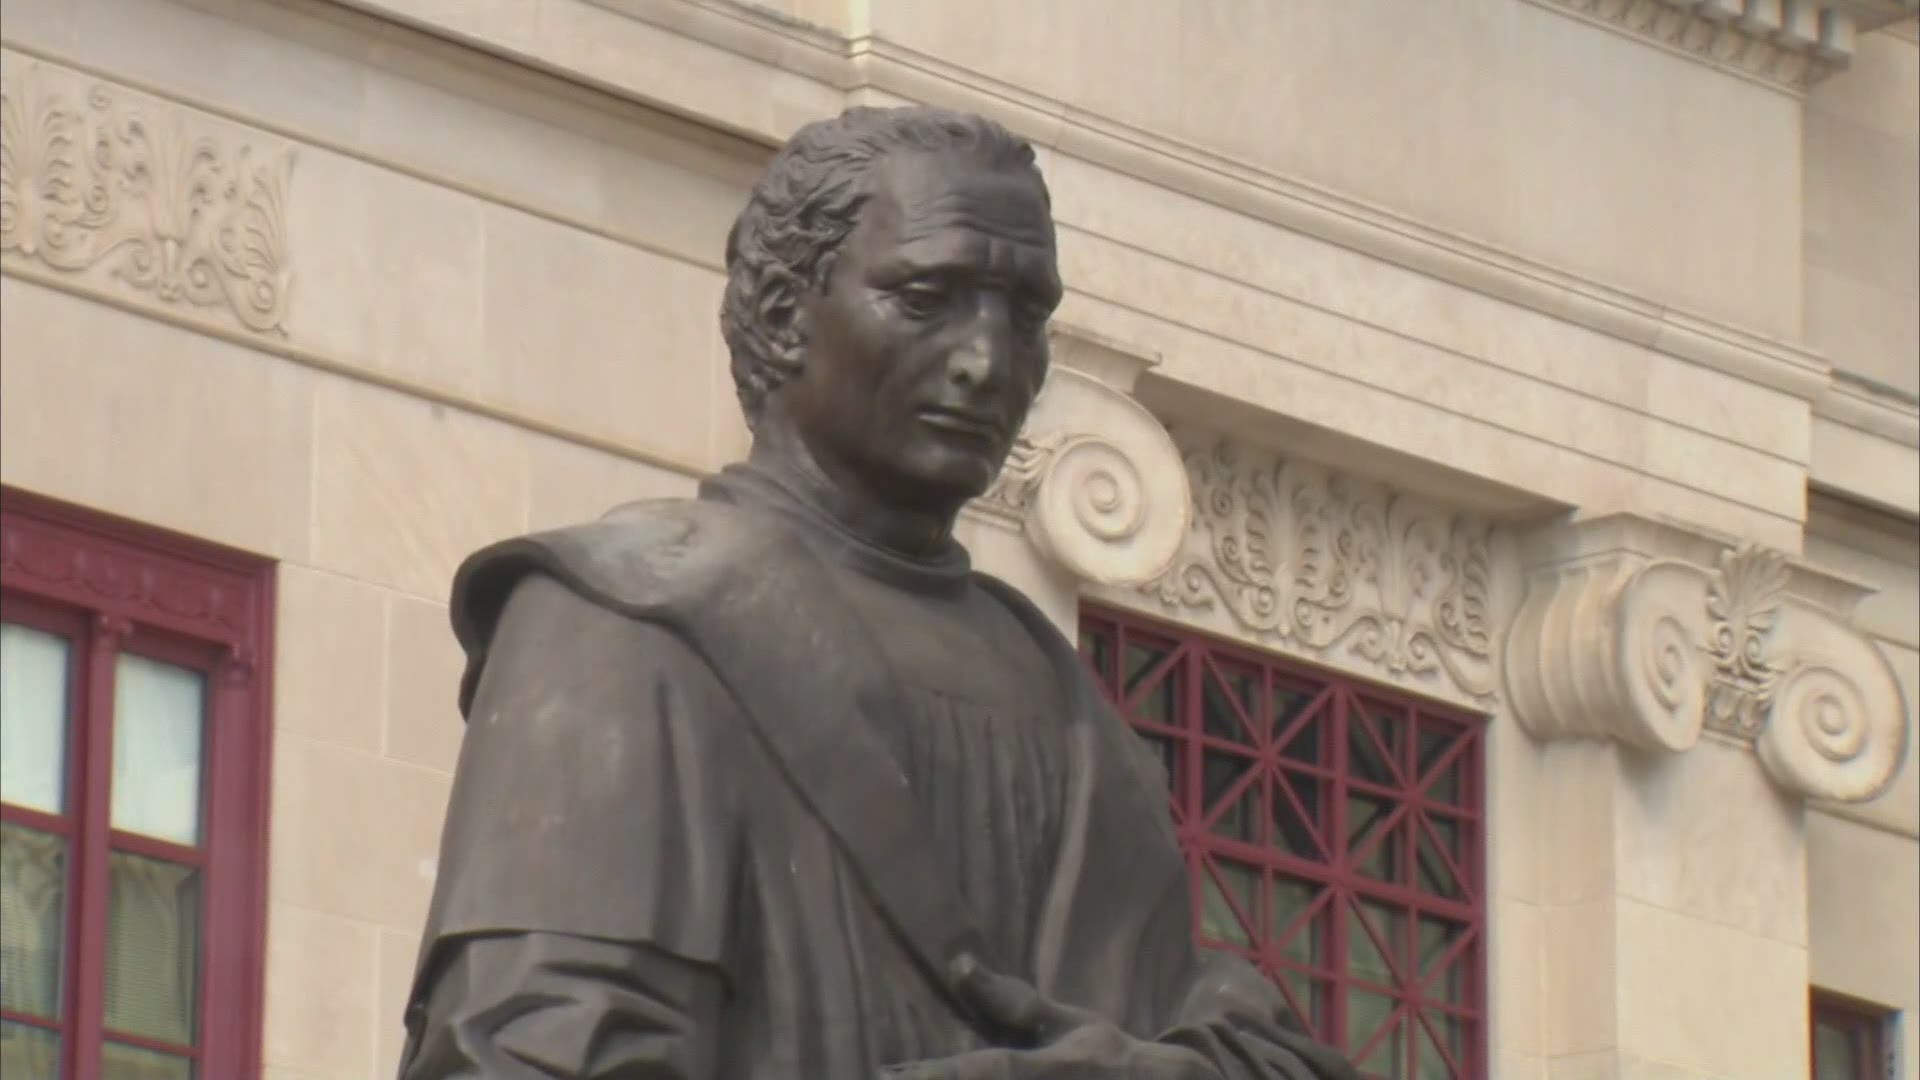 Mayor Andrew Ginther is legally allowed to order the removal of the Christopher Columbus statue, per Columbus City Attorney’s Office.